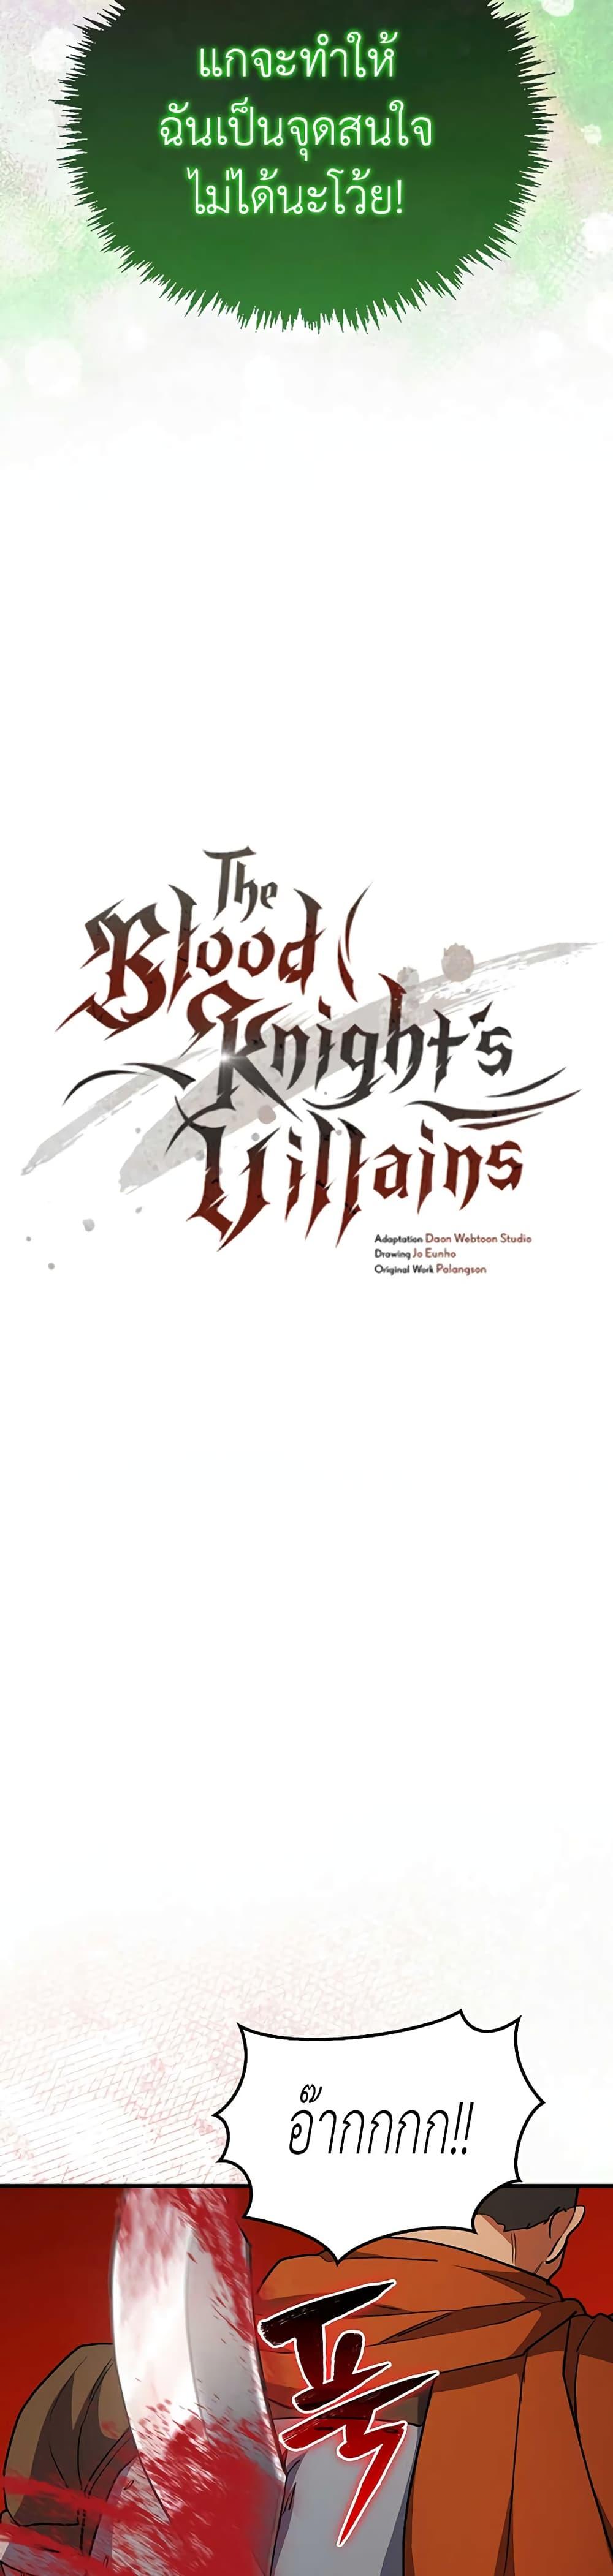 The Blood Knight’s Villains 23 13